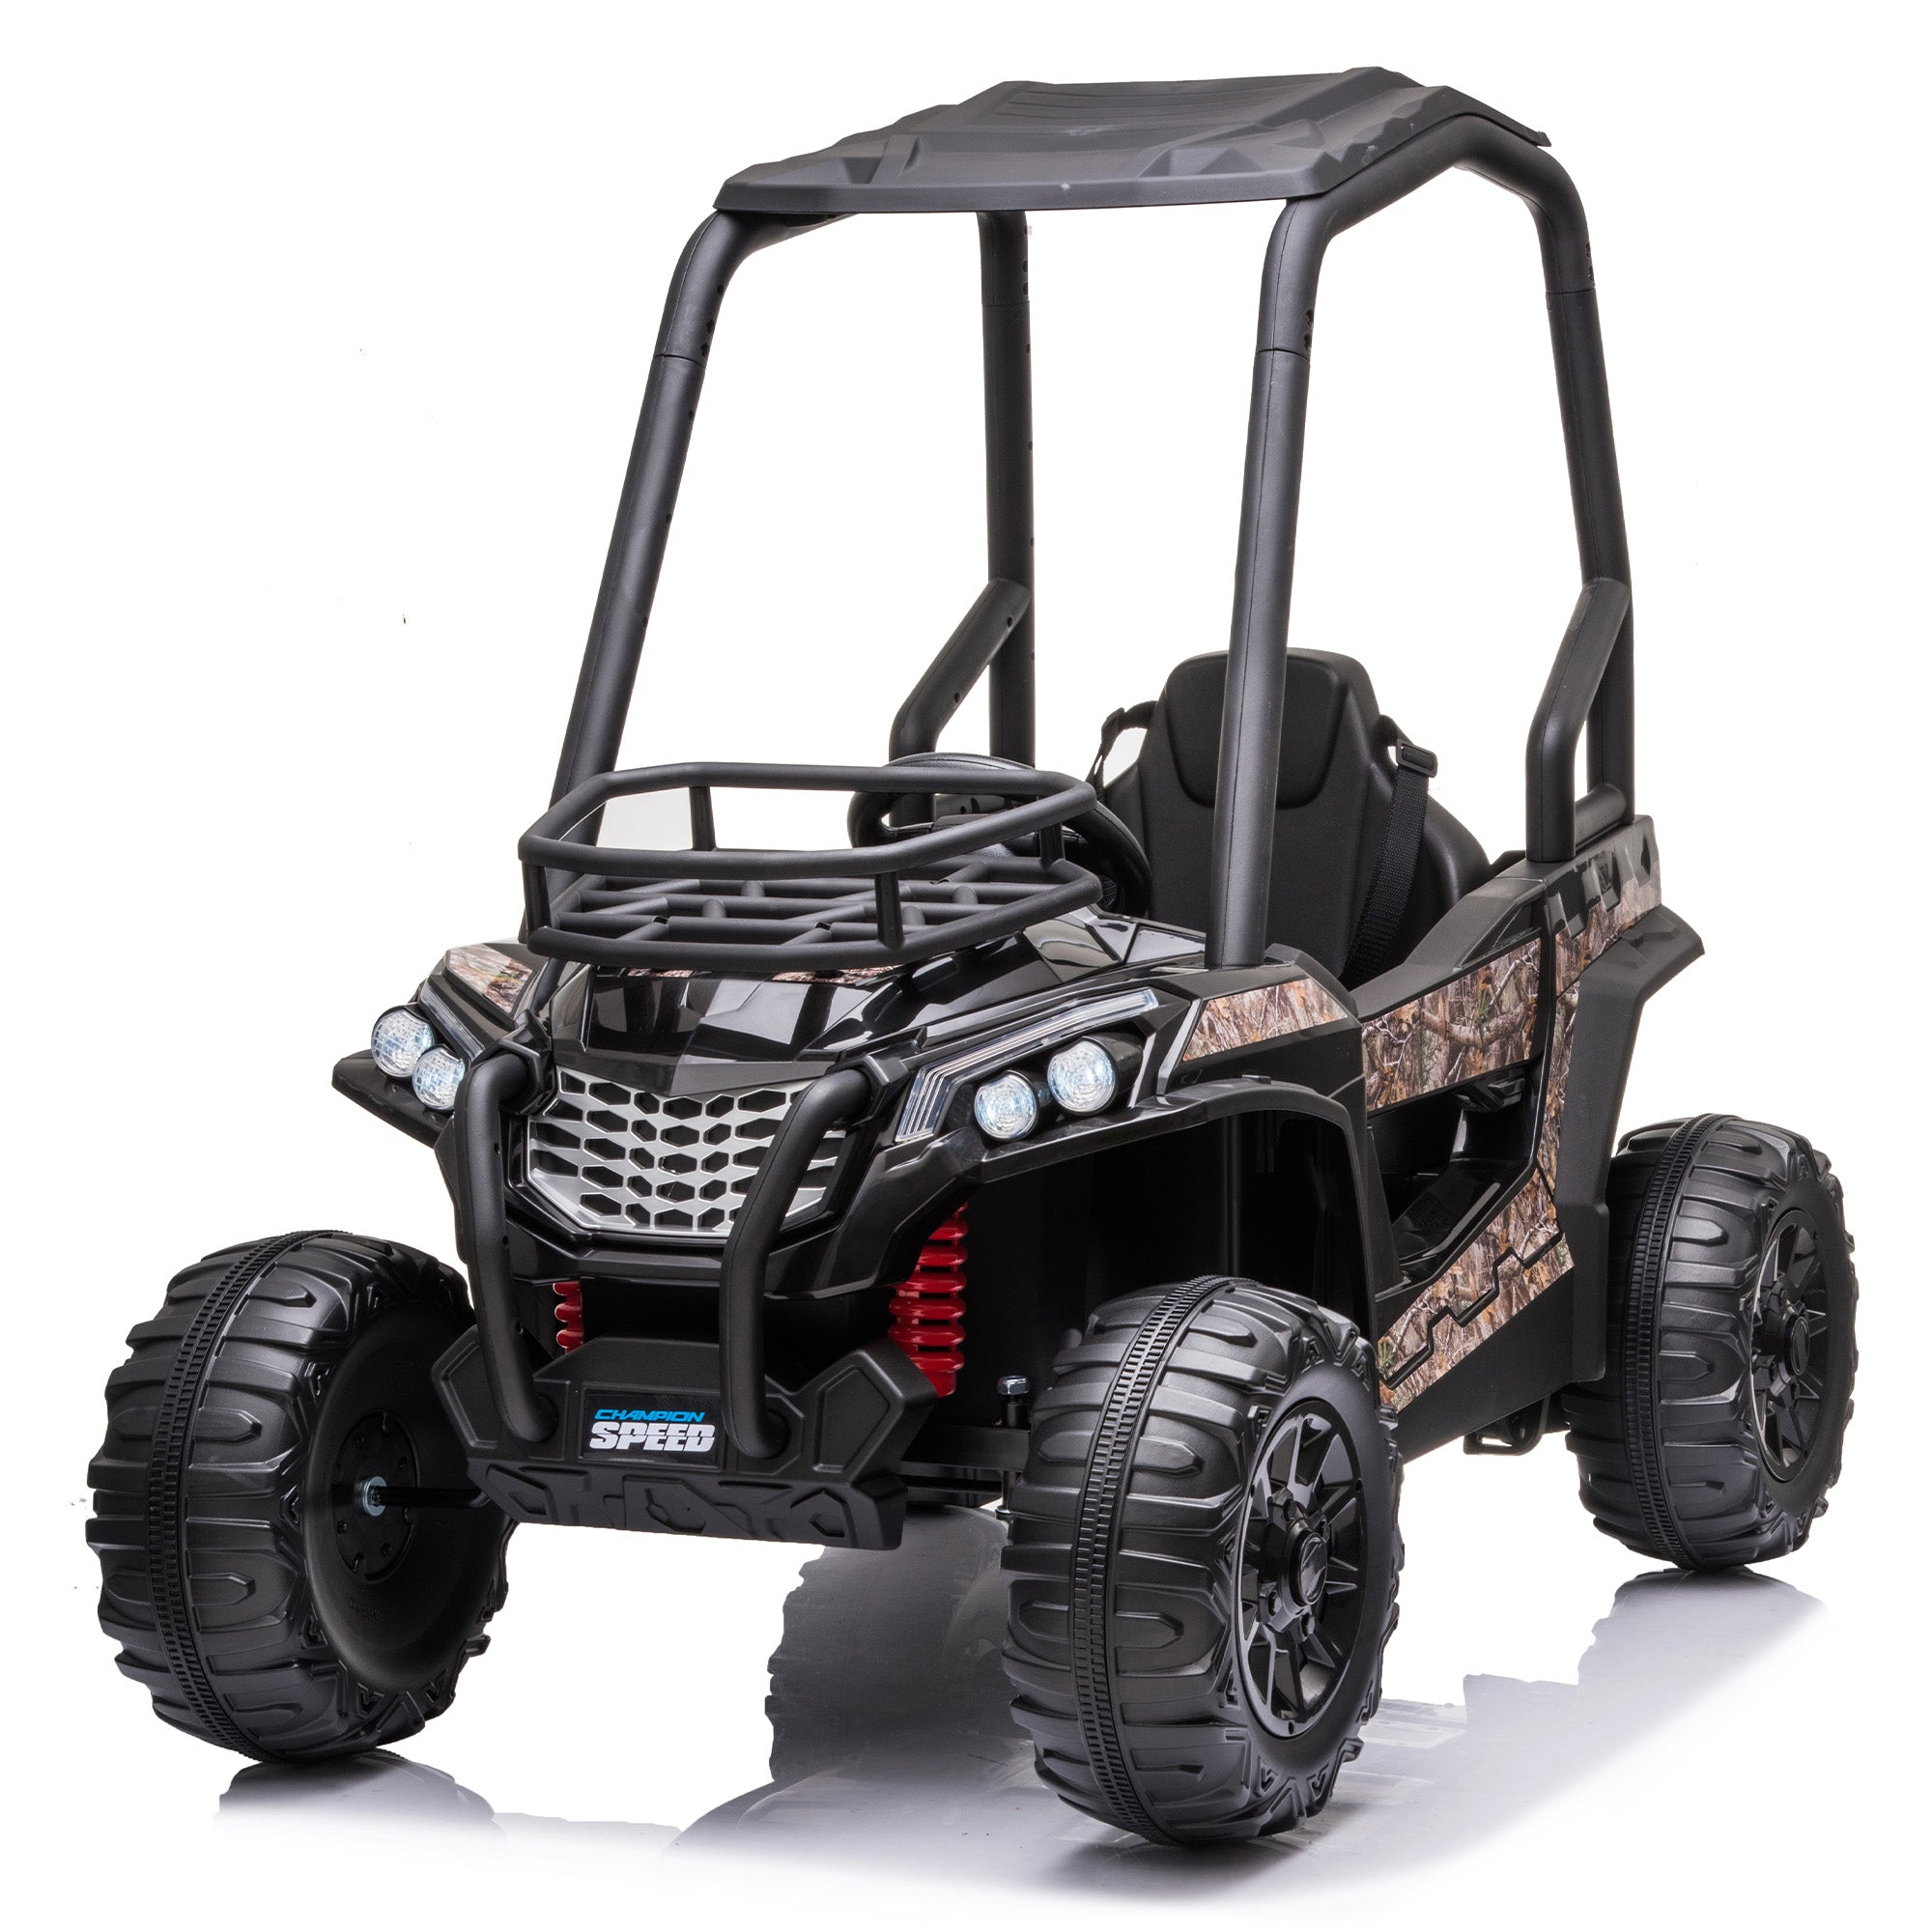 Kidsera 24V Ride on Car with Remote Control, 4WD Battery Powered UTV